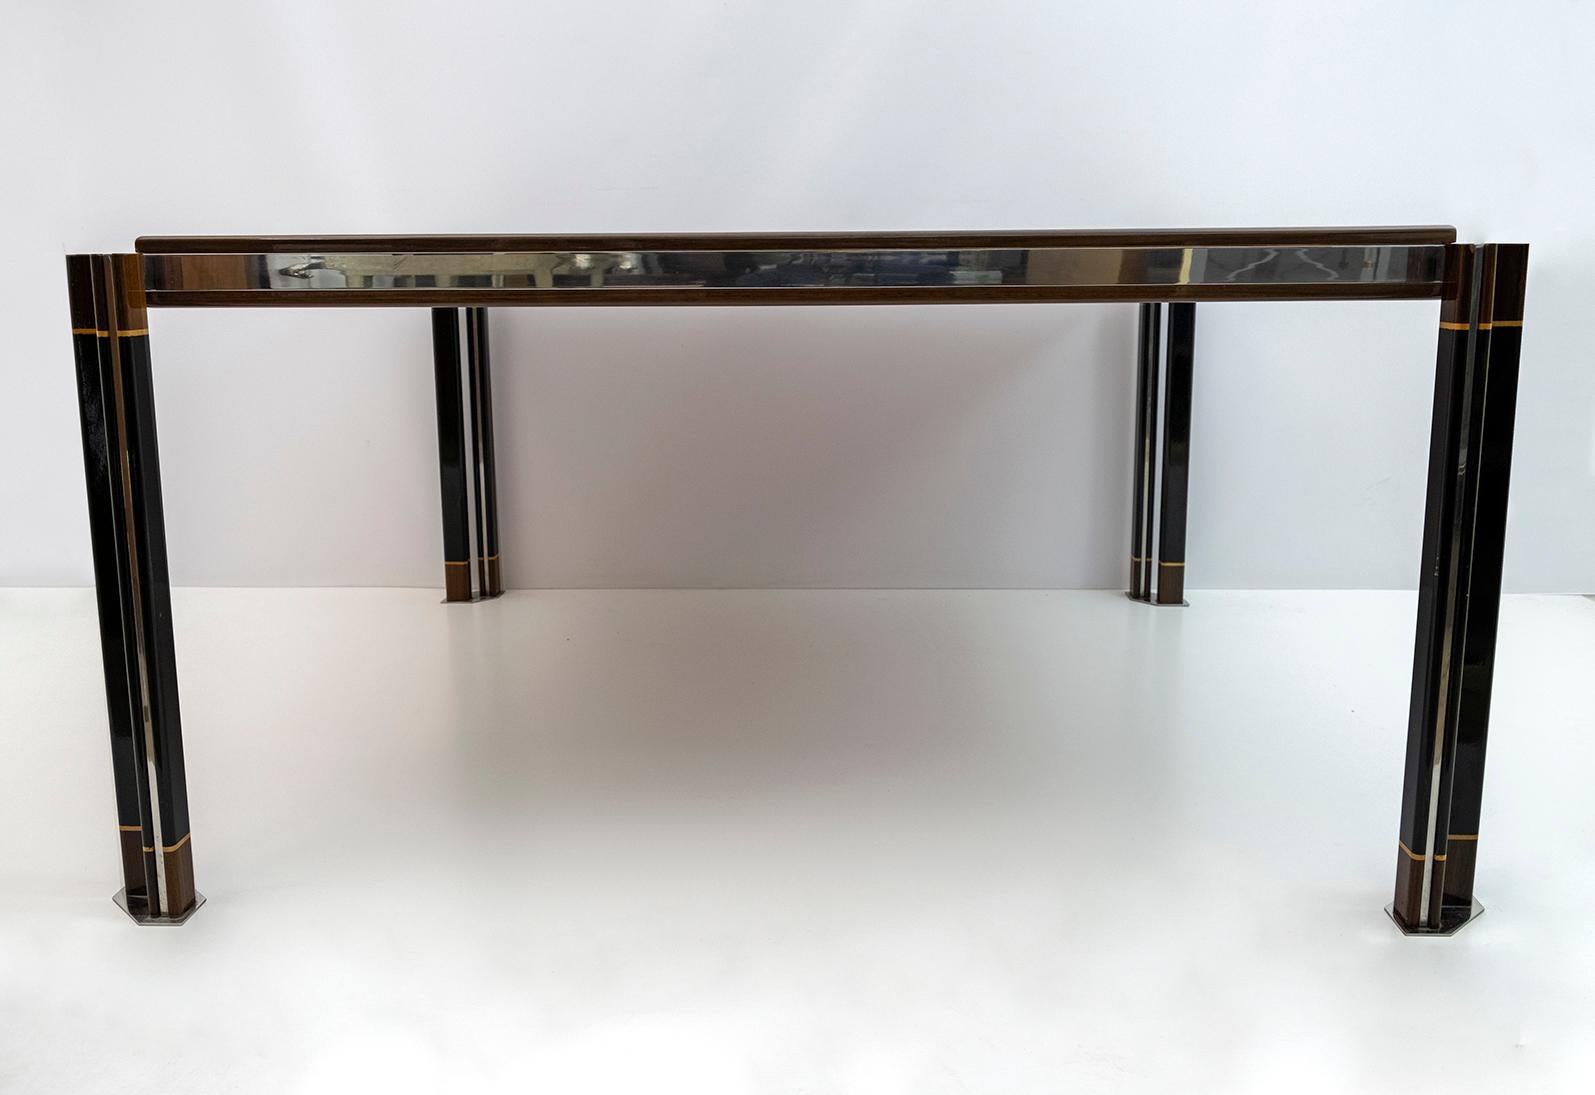 Paolo Barracchia Italian Steel and Inlaid Wood Dinning Table by Roman Deco, 1978 For Sale 7